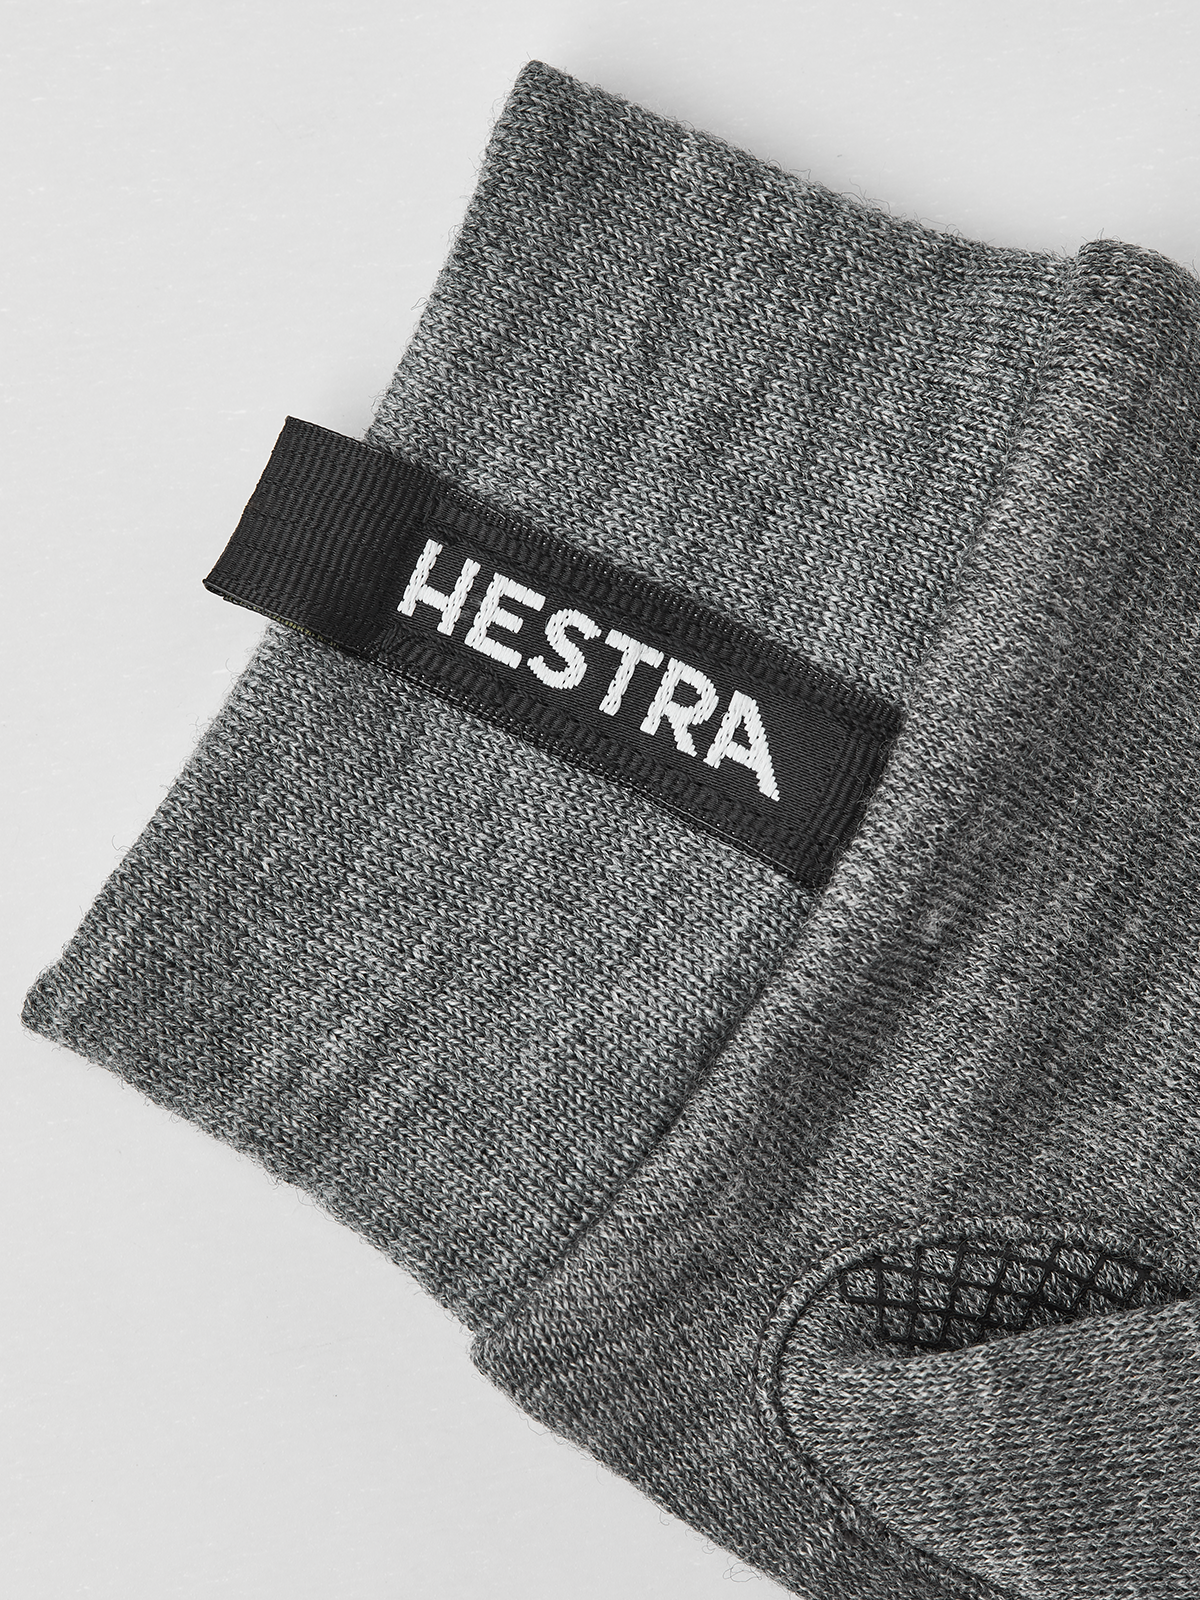 Hestra Merino Touch Point Liner Touch Screen Compatible Liner for Additional Layering Or As A Thin Glove 